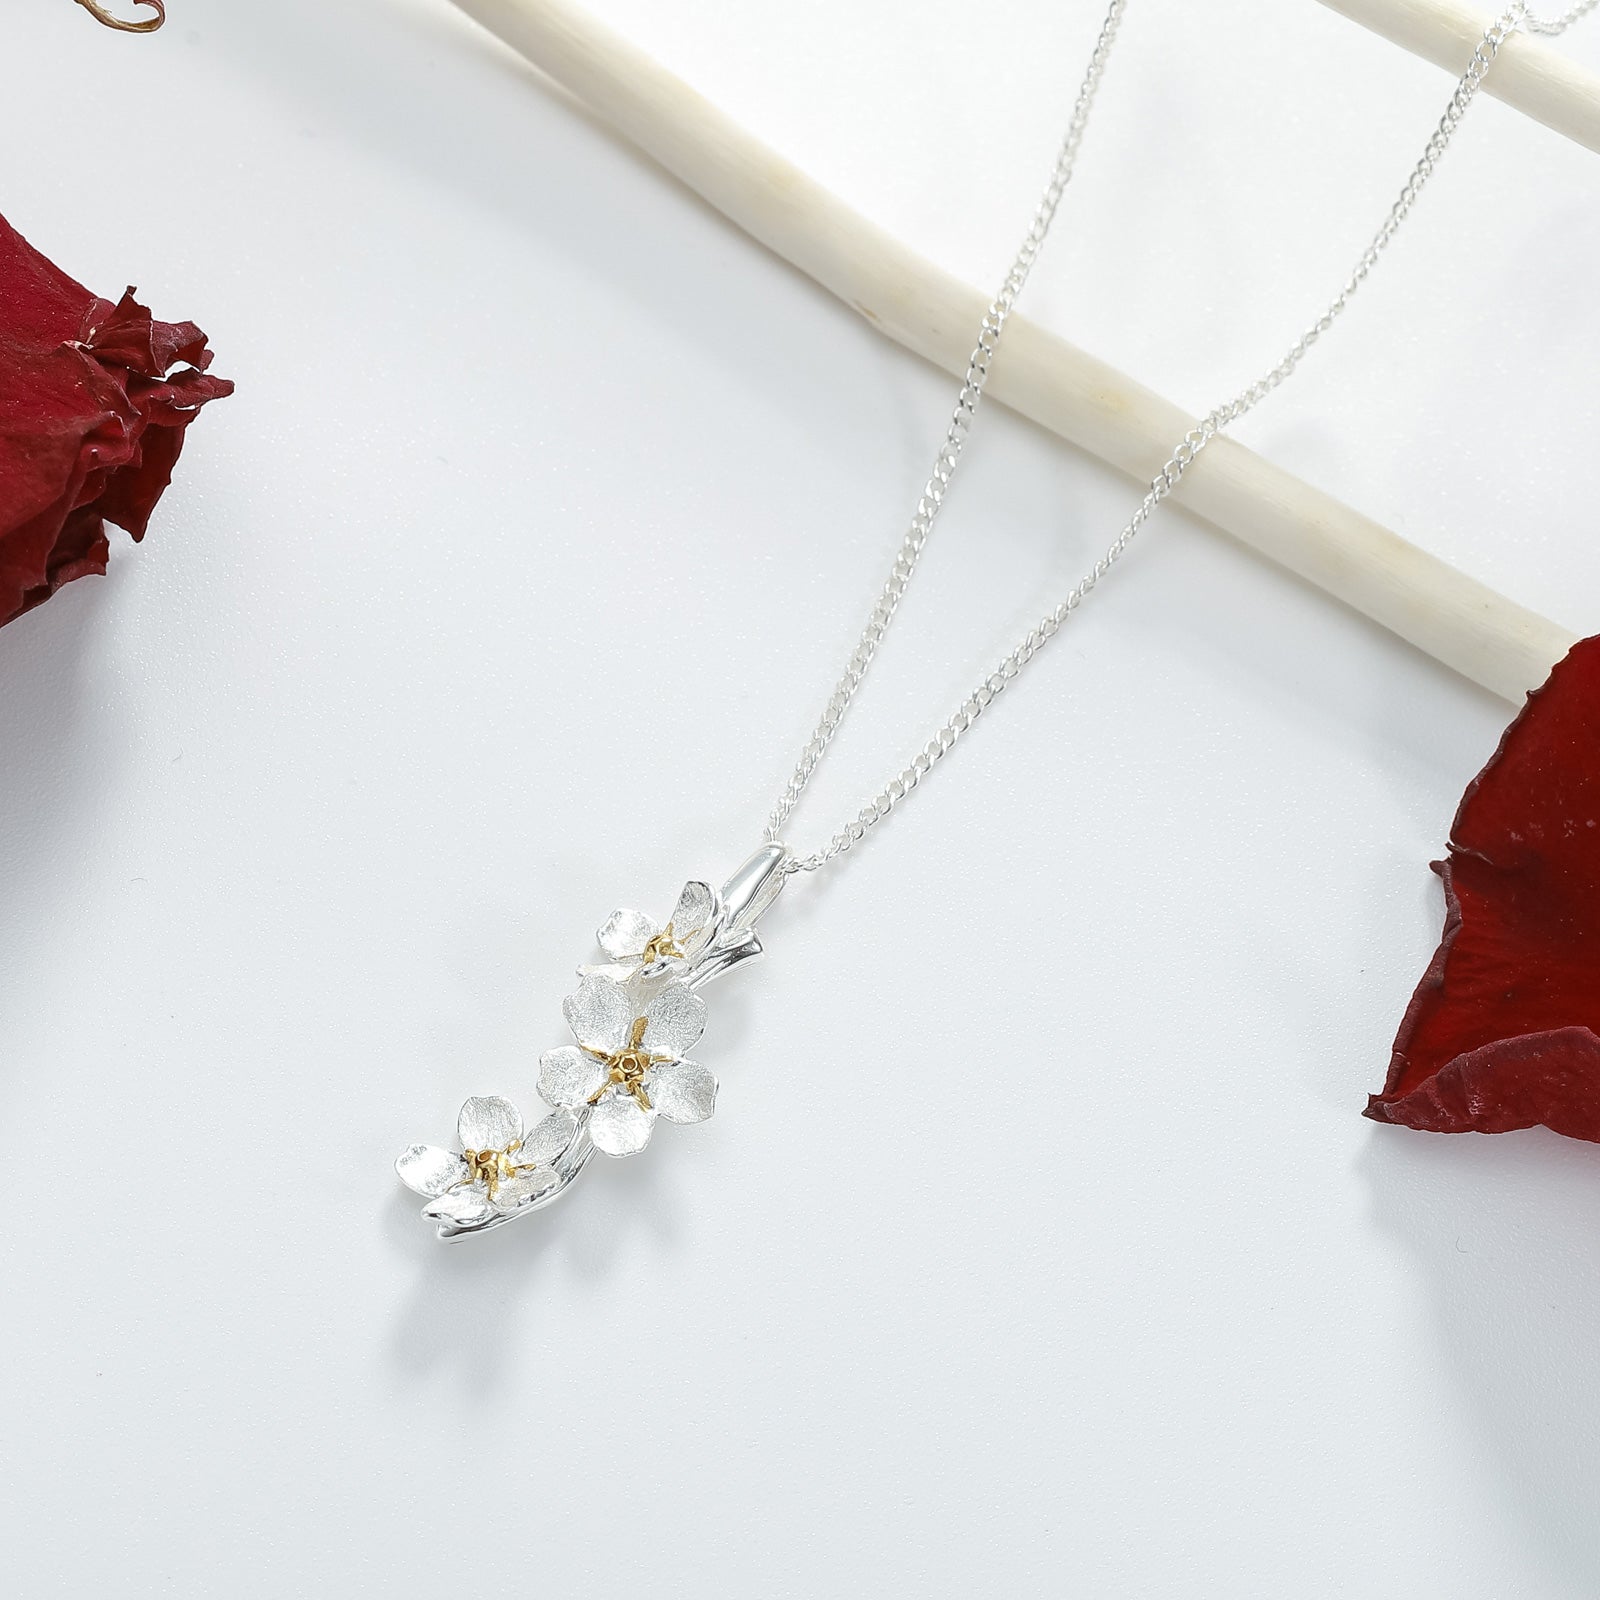 Forget-Me-Not Flowers Chain Necklace